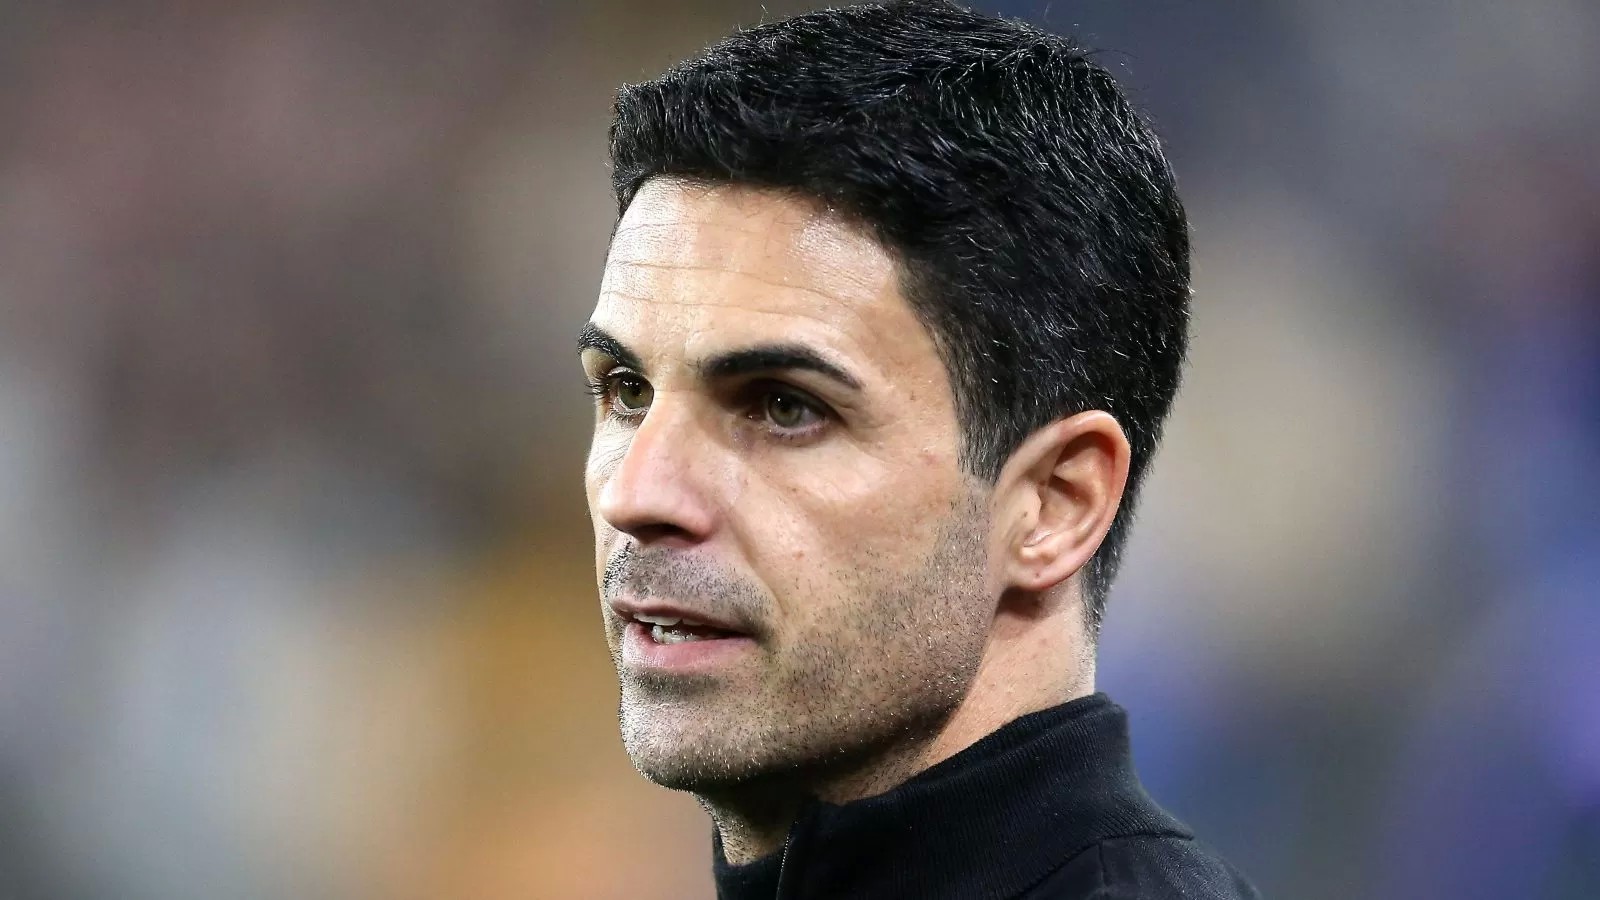 Arteta not expecting ‘rose pathway’ to Prem title as Arsenal lacked ‘composure’ in defeat to Everton